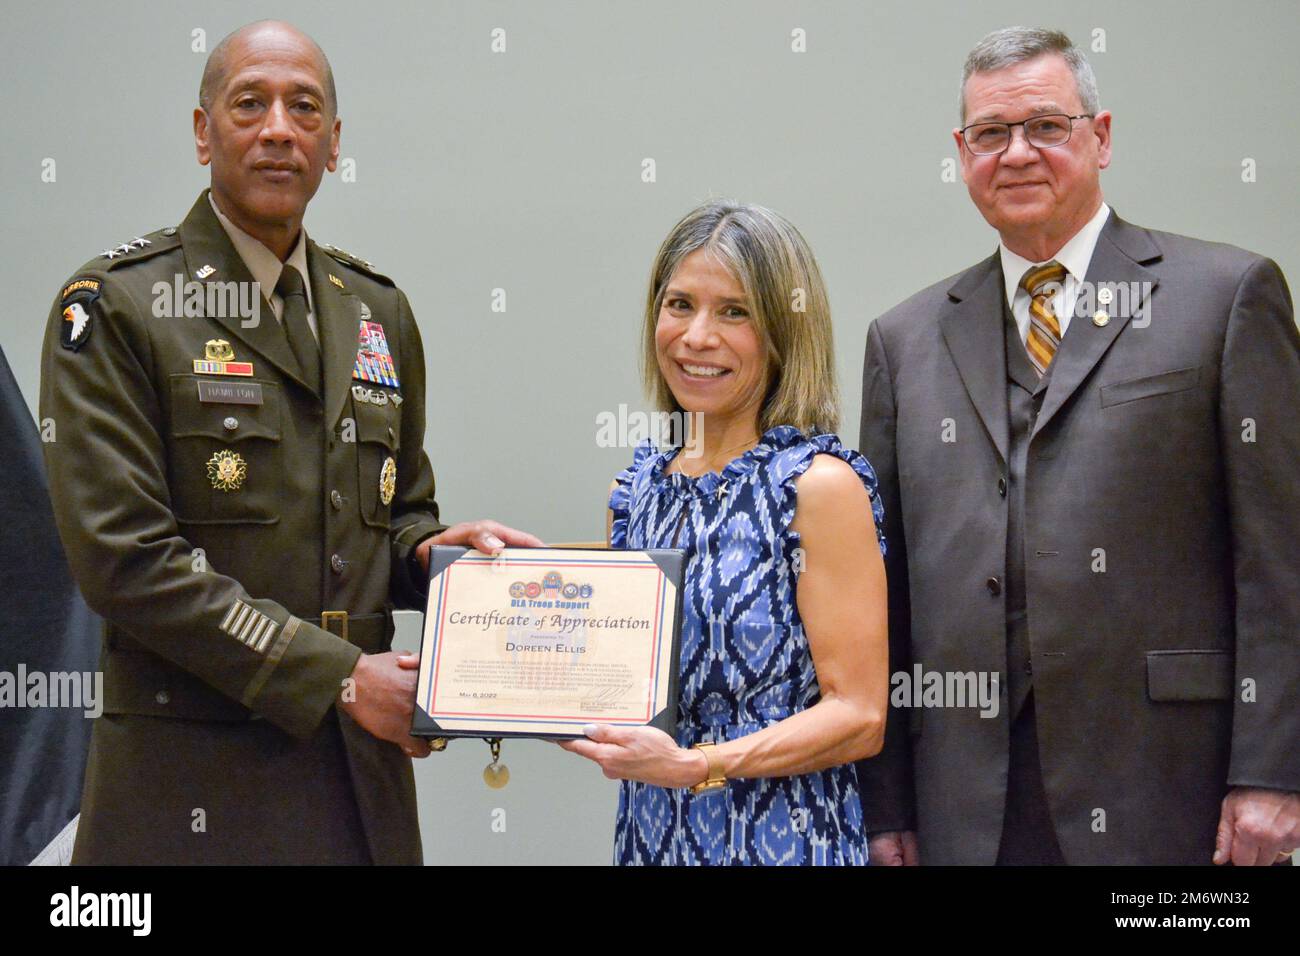 Doreen Ellis, center, receives a commander’s certificate of appreciation from Army Lt. Gen. Charles R. Hamilton, deputy chief of staff, G-4, during a retirement ceremony May 6, as DLA Troop Support Deputy Commander Richard Ellis looks on during his retirement ceremony May 6. Ellis retired after 38 years of federal service, 26 in the Navy and 12 at Troop Support. Stock Photo